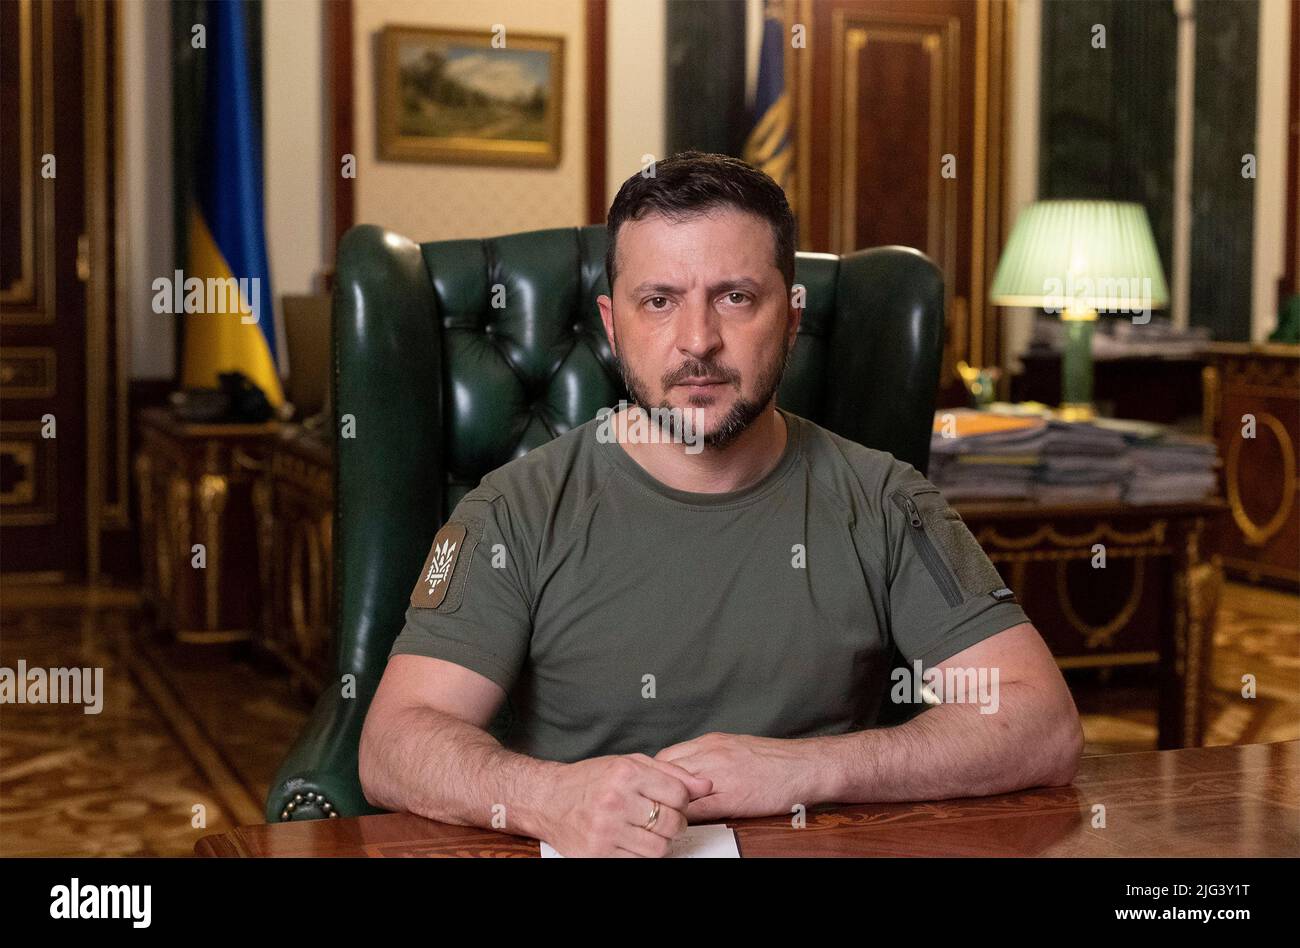 Kyiv, Ukraine. 03 July, 2022. Ukrainian President Volodymyr Zelenskyy, delivers his daily address via video link to the Ukrainian people on the 130th day of the Russian invasion from his office at the Mariinskyi Palace, July 3, 2022 in Kyiv, Ukraine.  Credit: Ukrainian Presidential Press Office/Ukraine Presidency/Alamy Live News Stock Photo